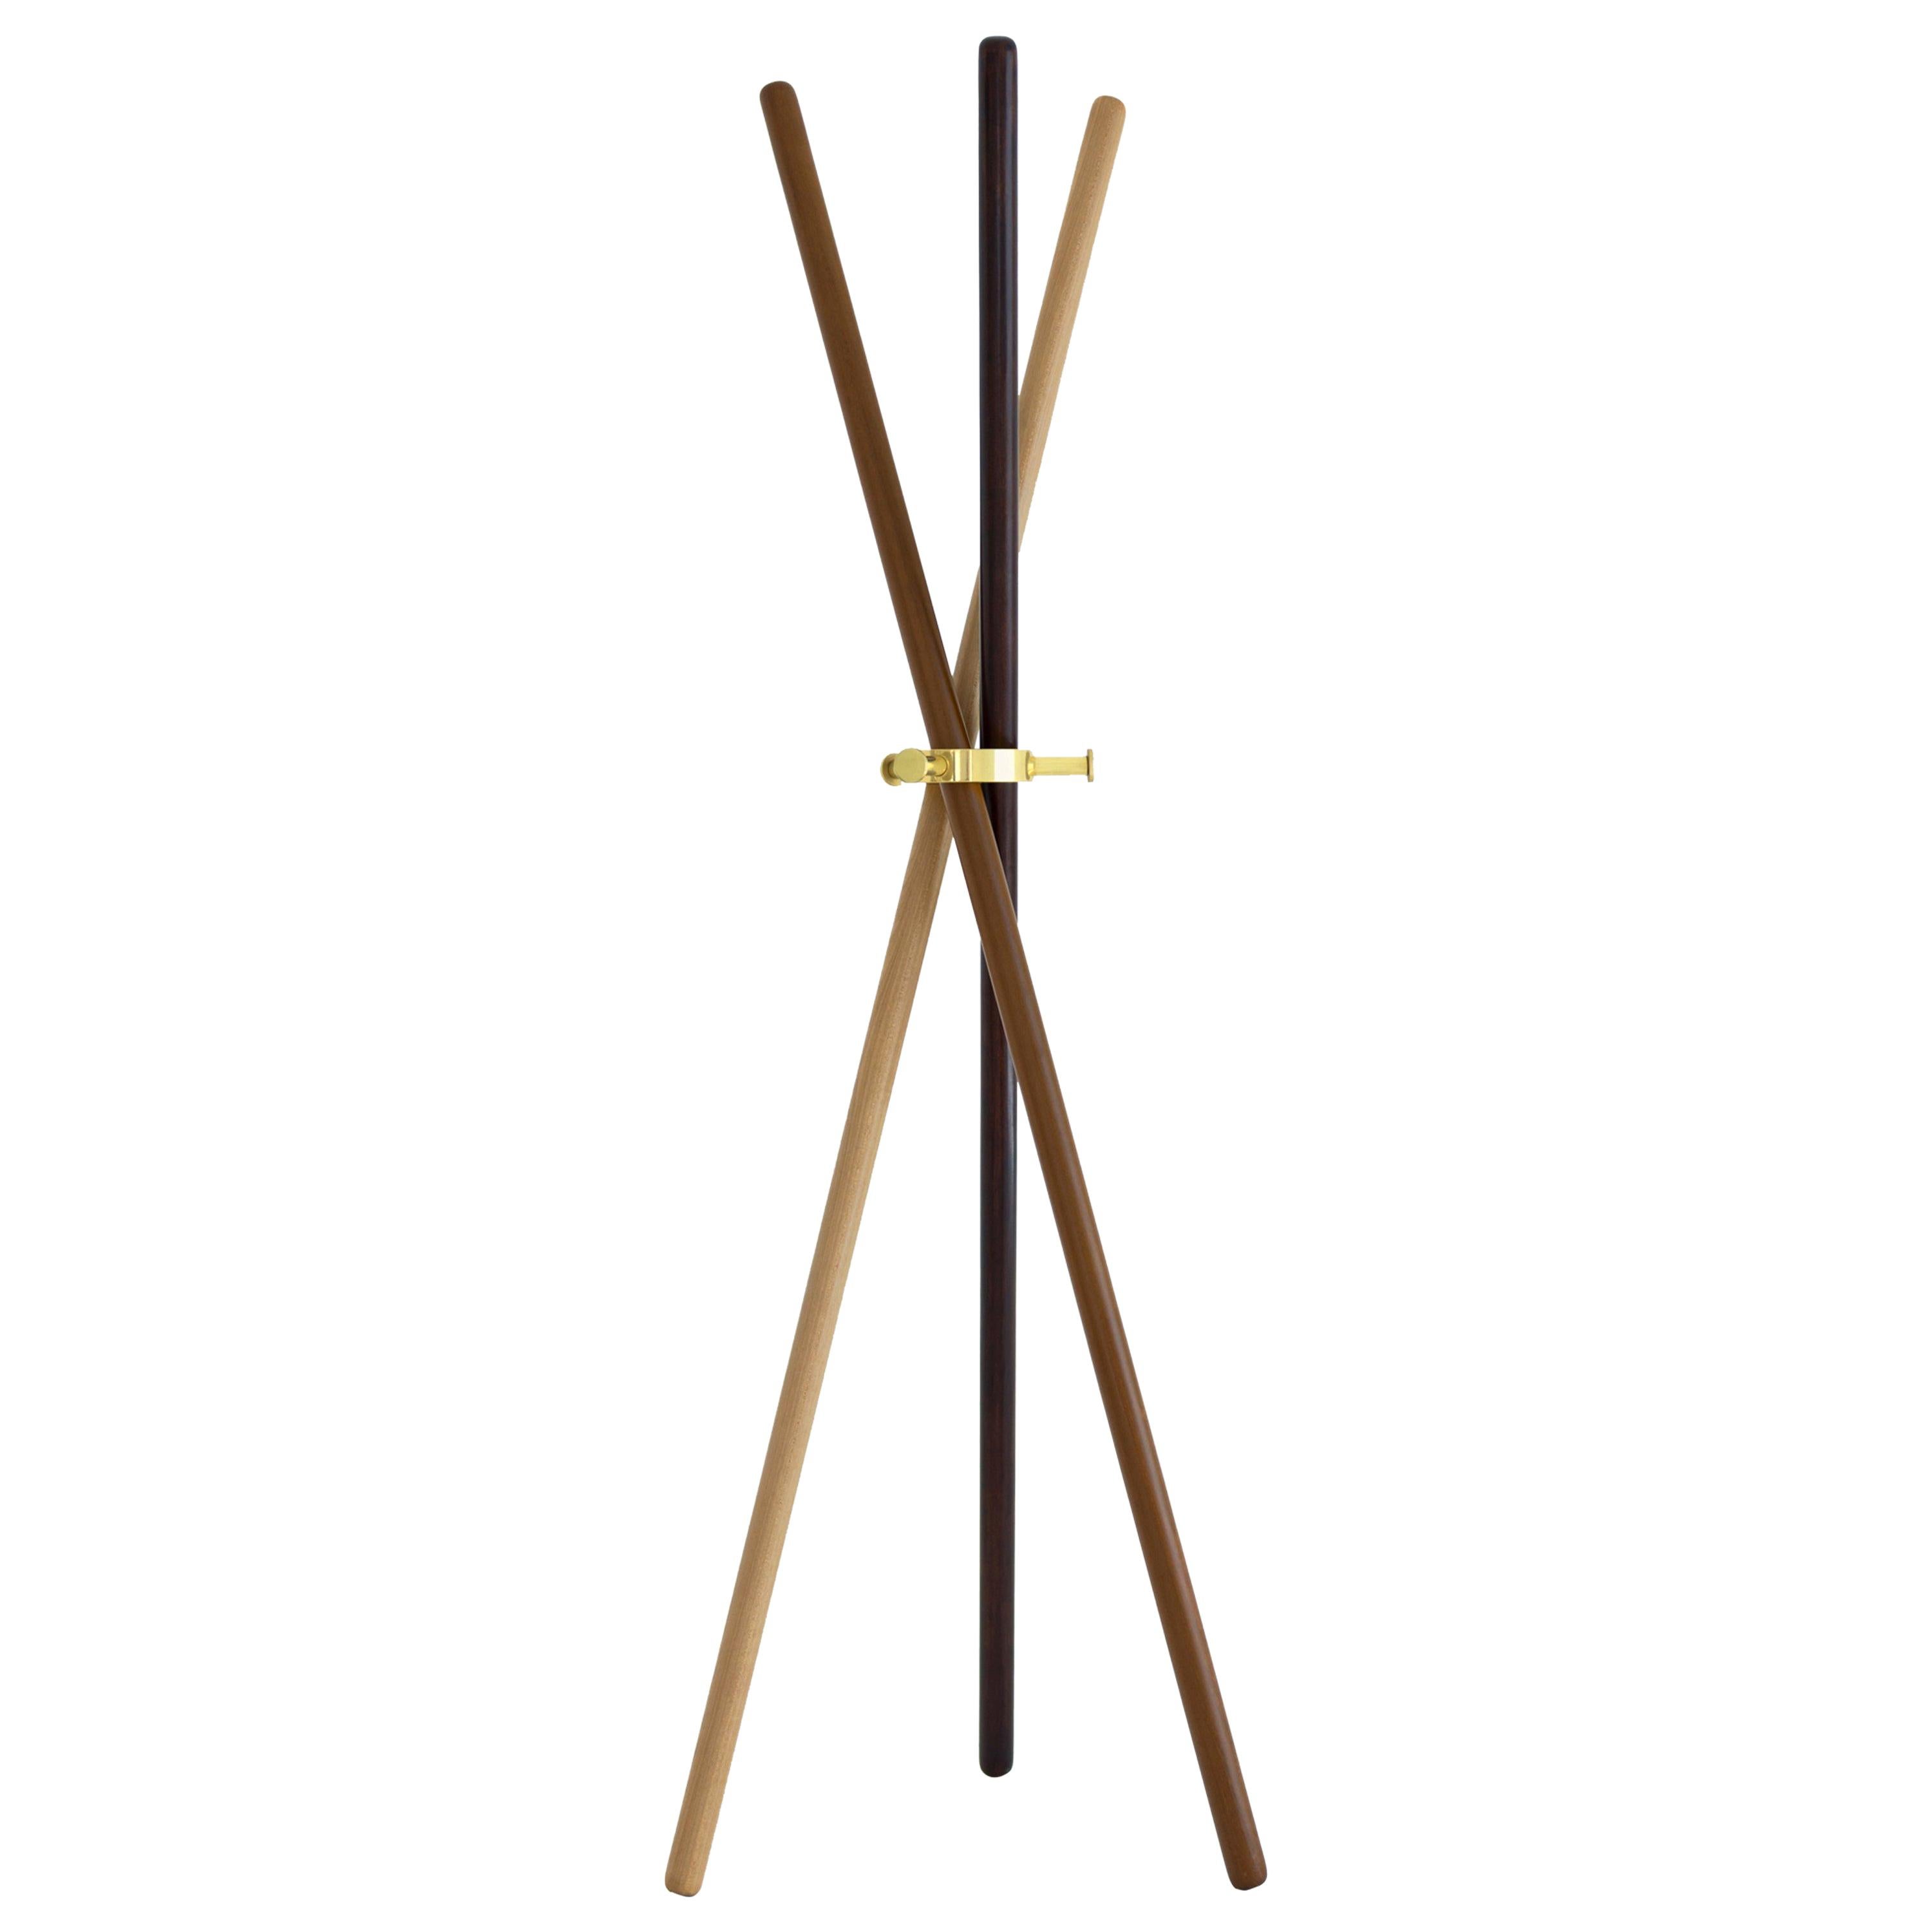 Brass and wood Sculpted Coat Stand, Leandro Garcia, Contemporary Brazil Design